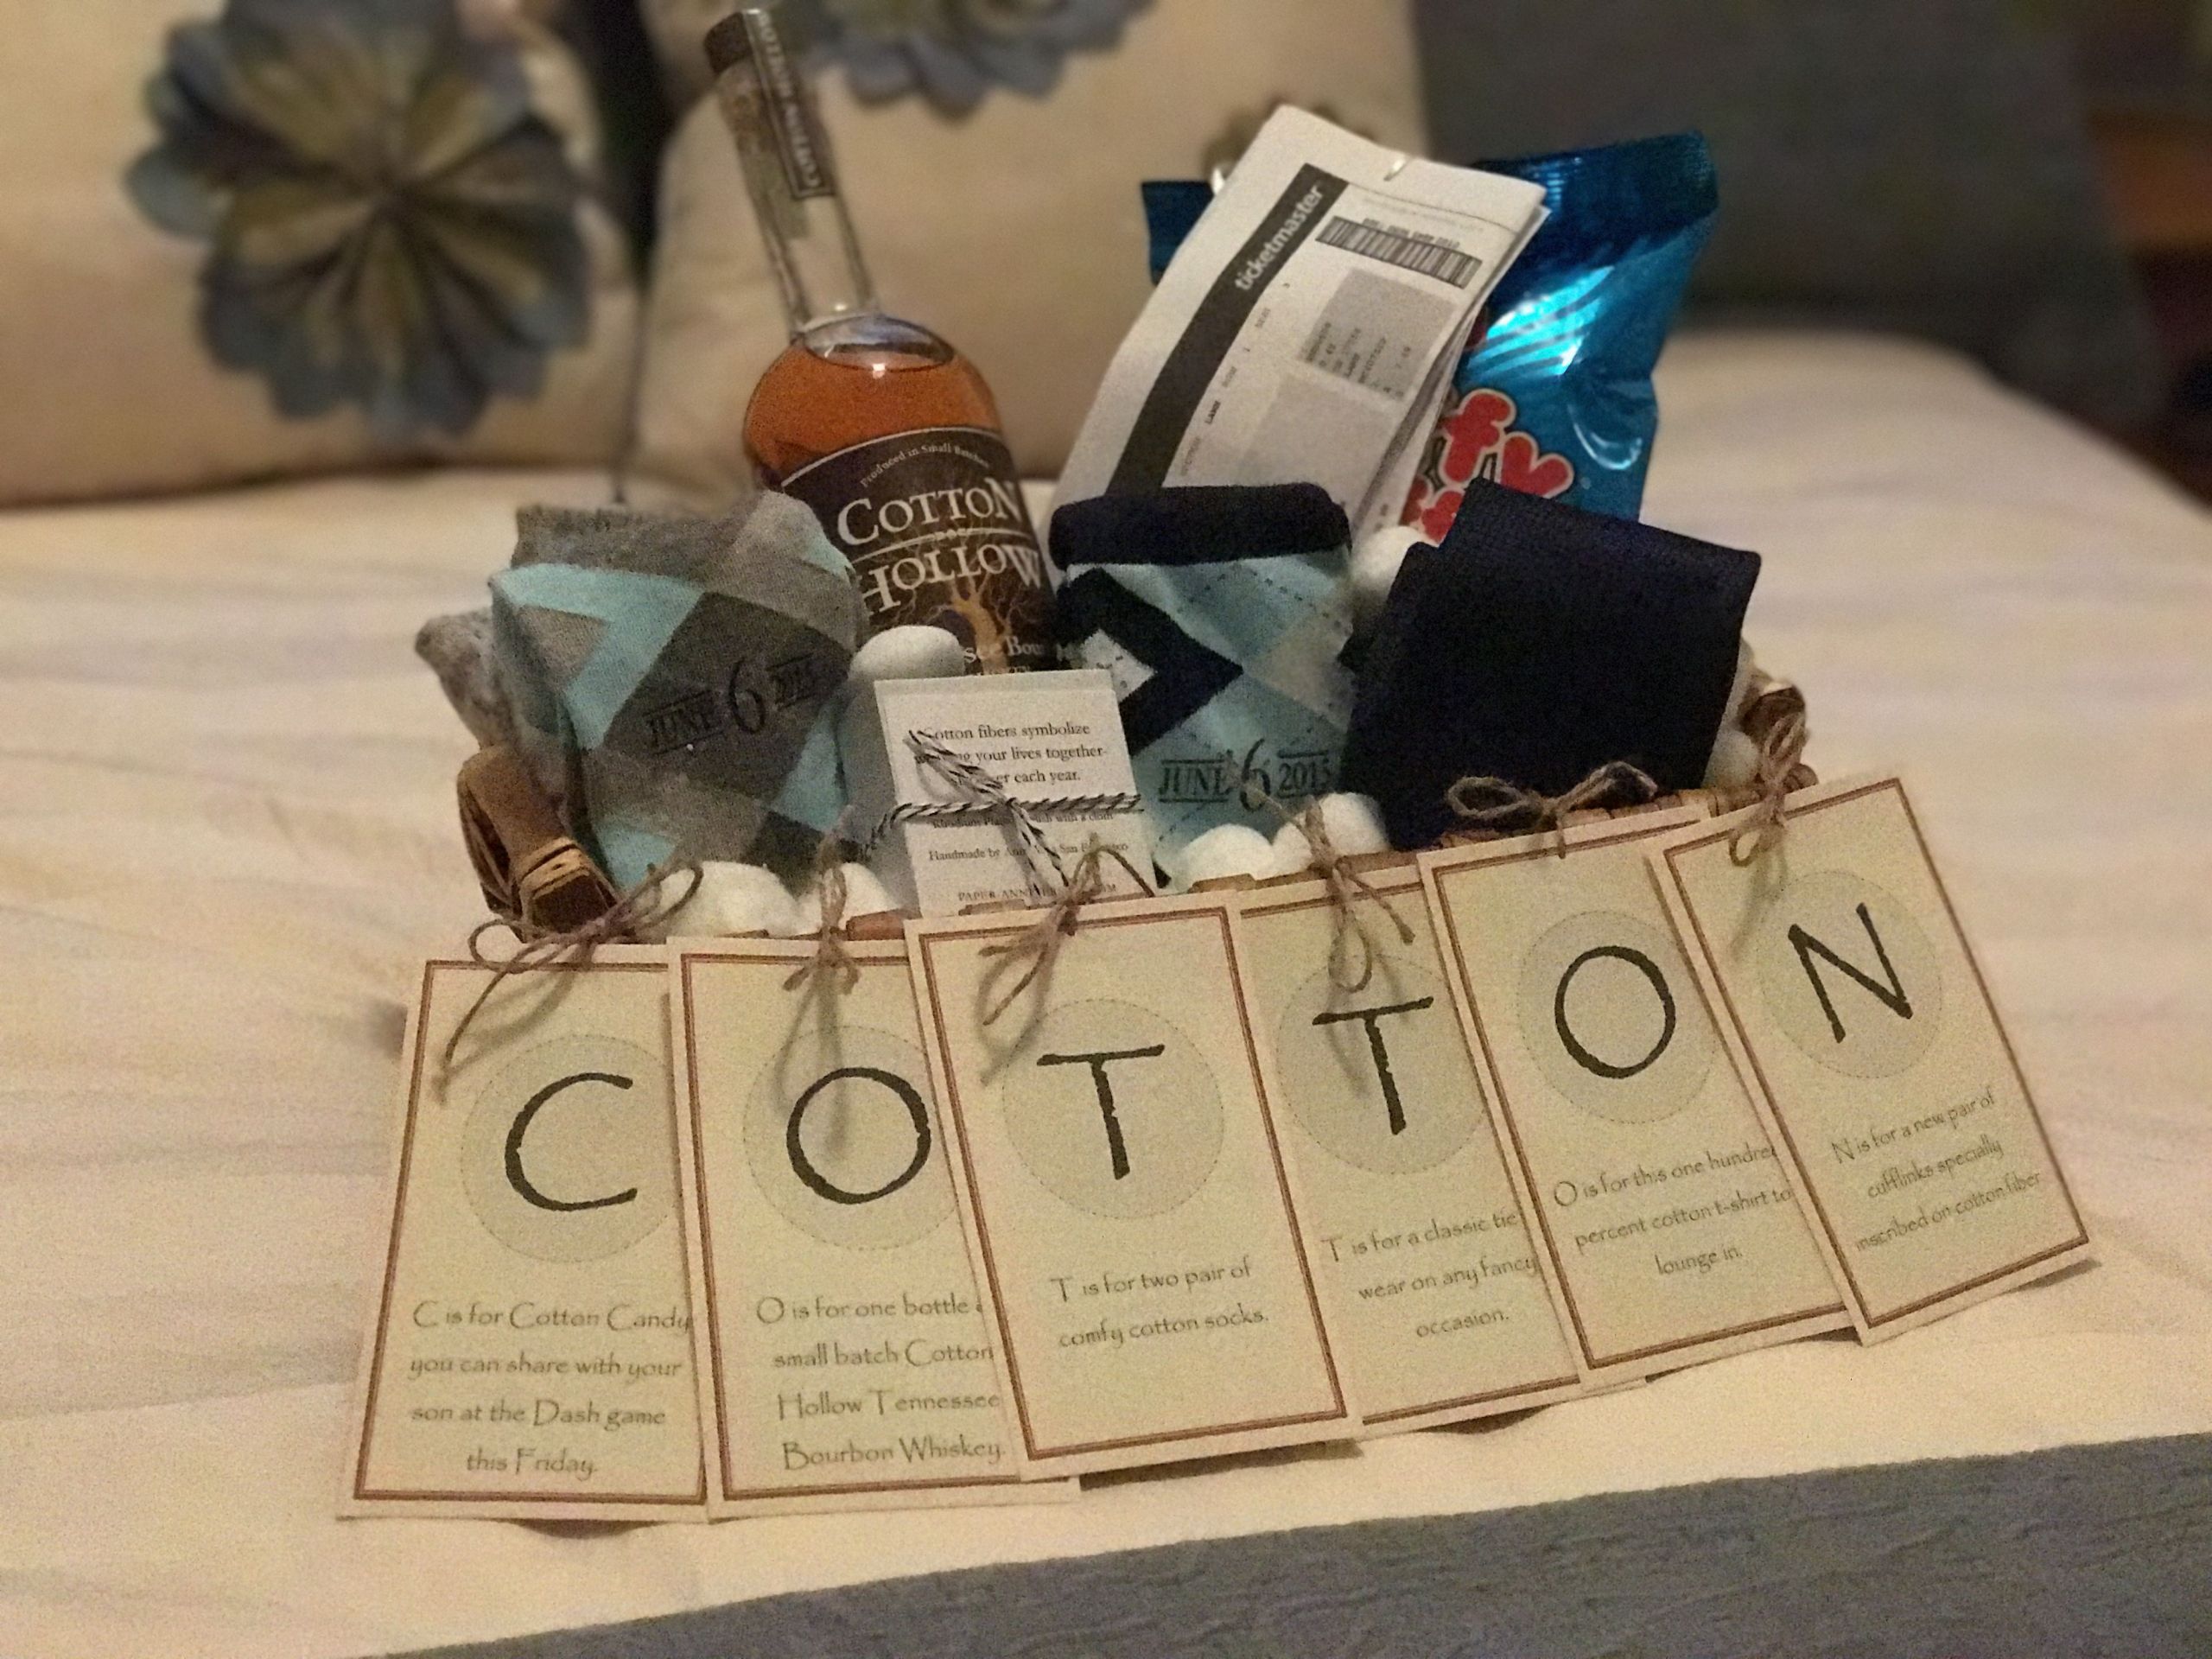 2Nd Wedding Anniversary Gift Ideas
 The "Cotton" Anniversary Gift for Him